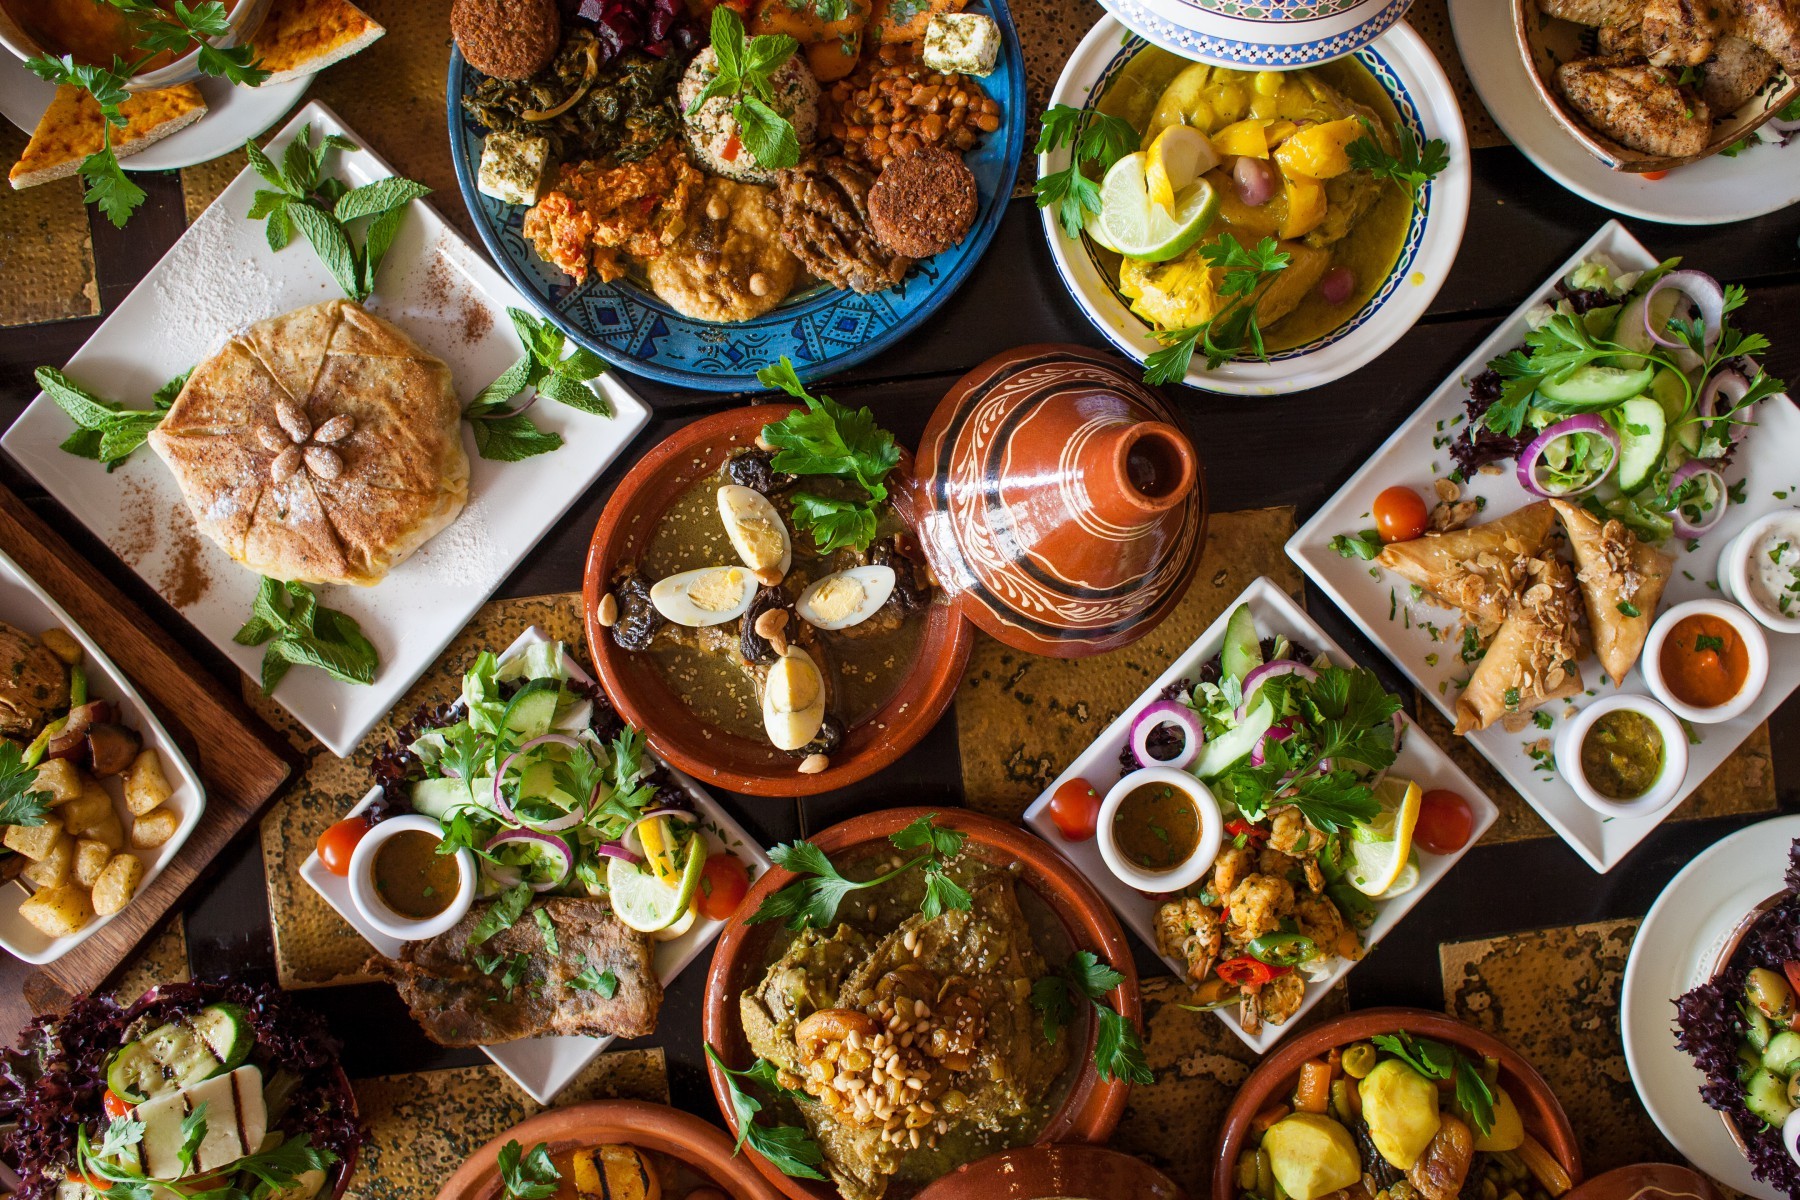 Gourmet Road Trip in Morocco: A Feast of Flavors